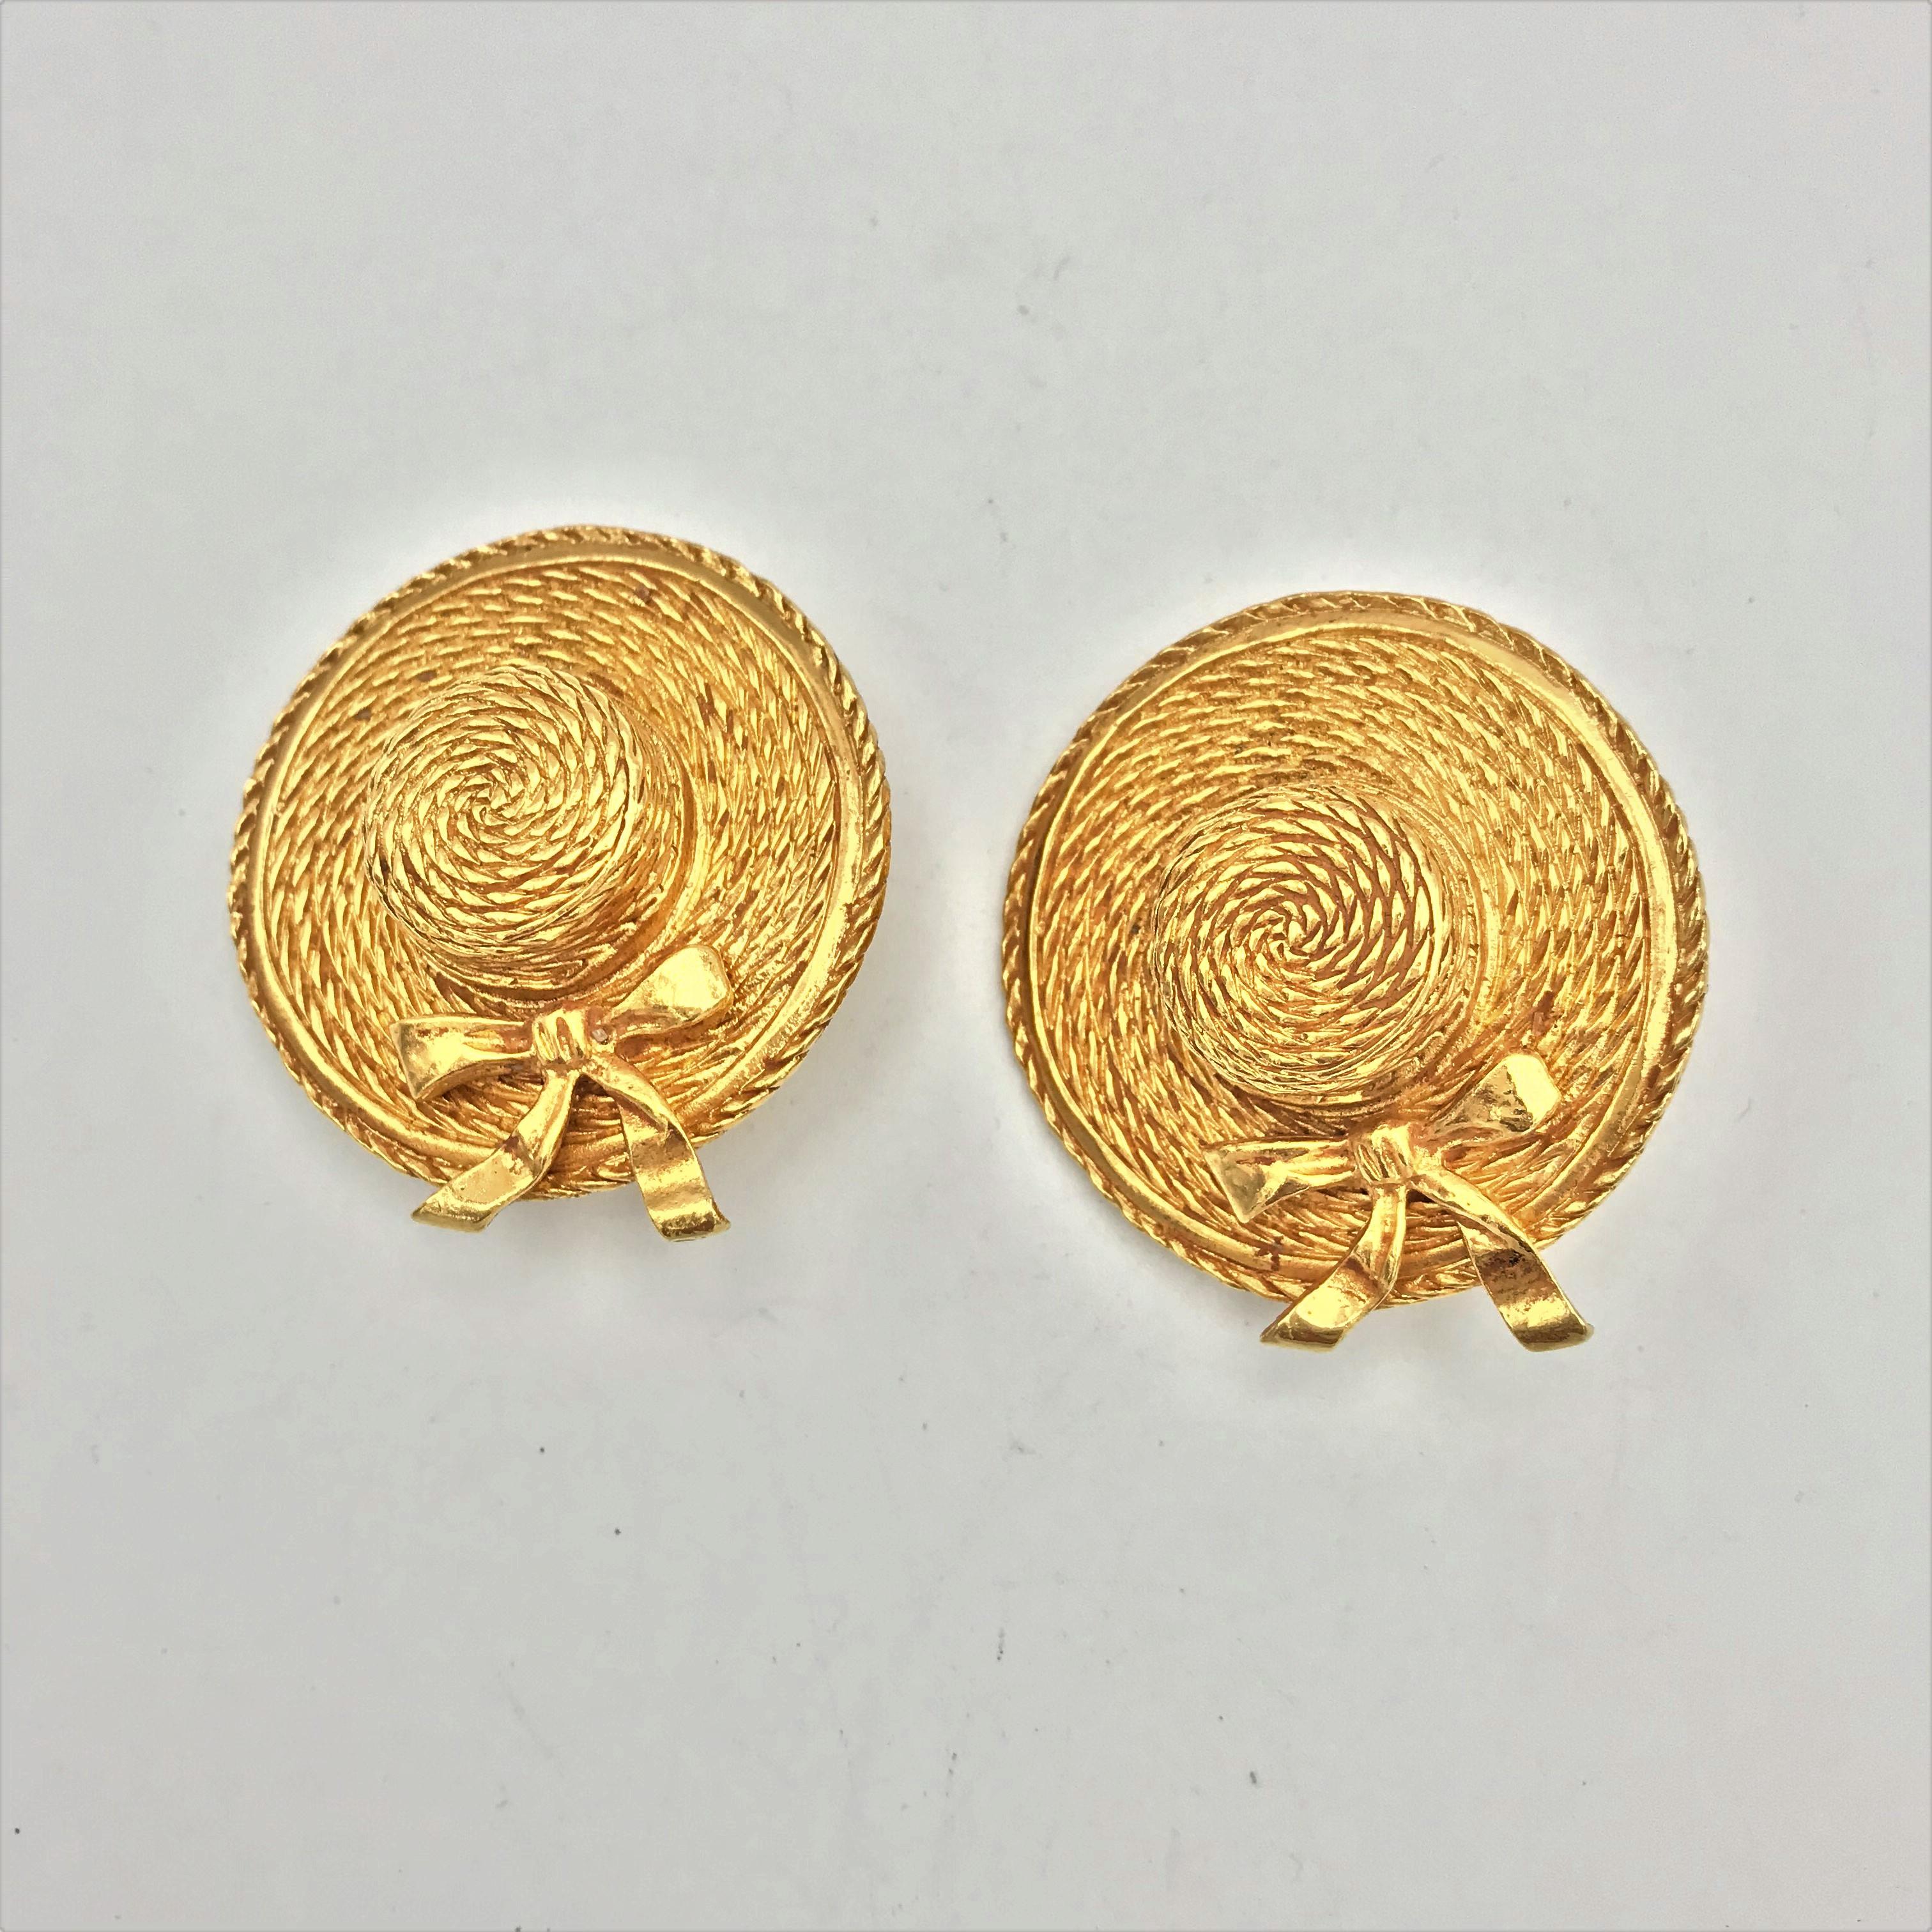 Chanel Clip-on Earrings in the shape of a hat, signed 1970/80s gold plated  For Sale 9